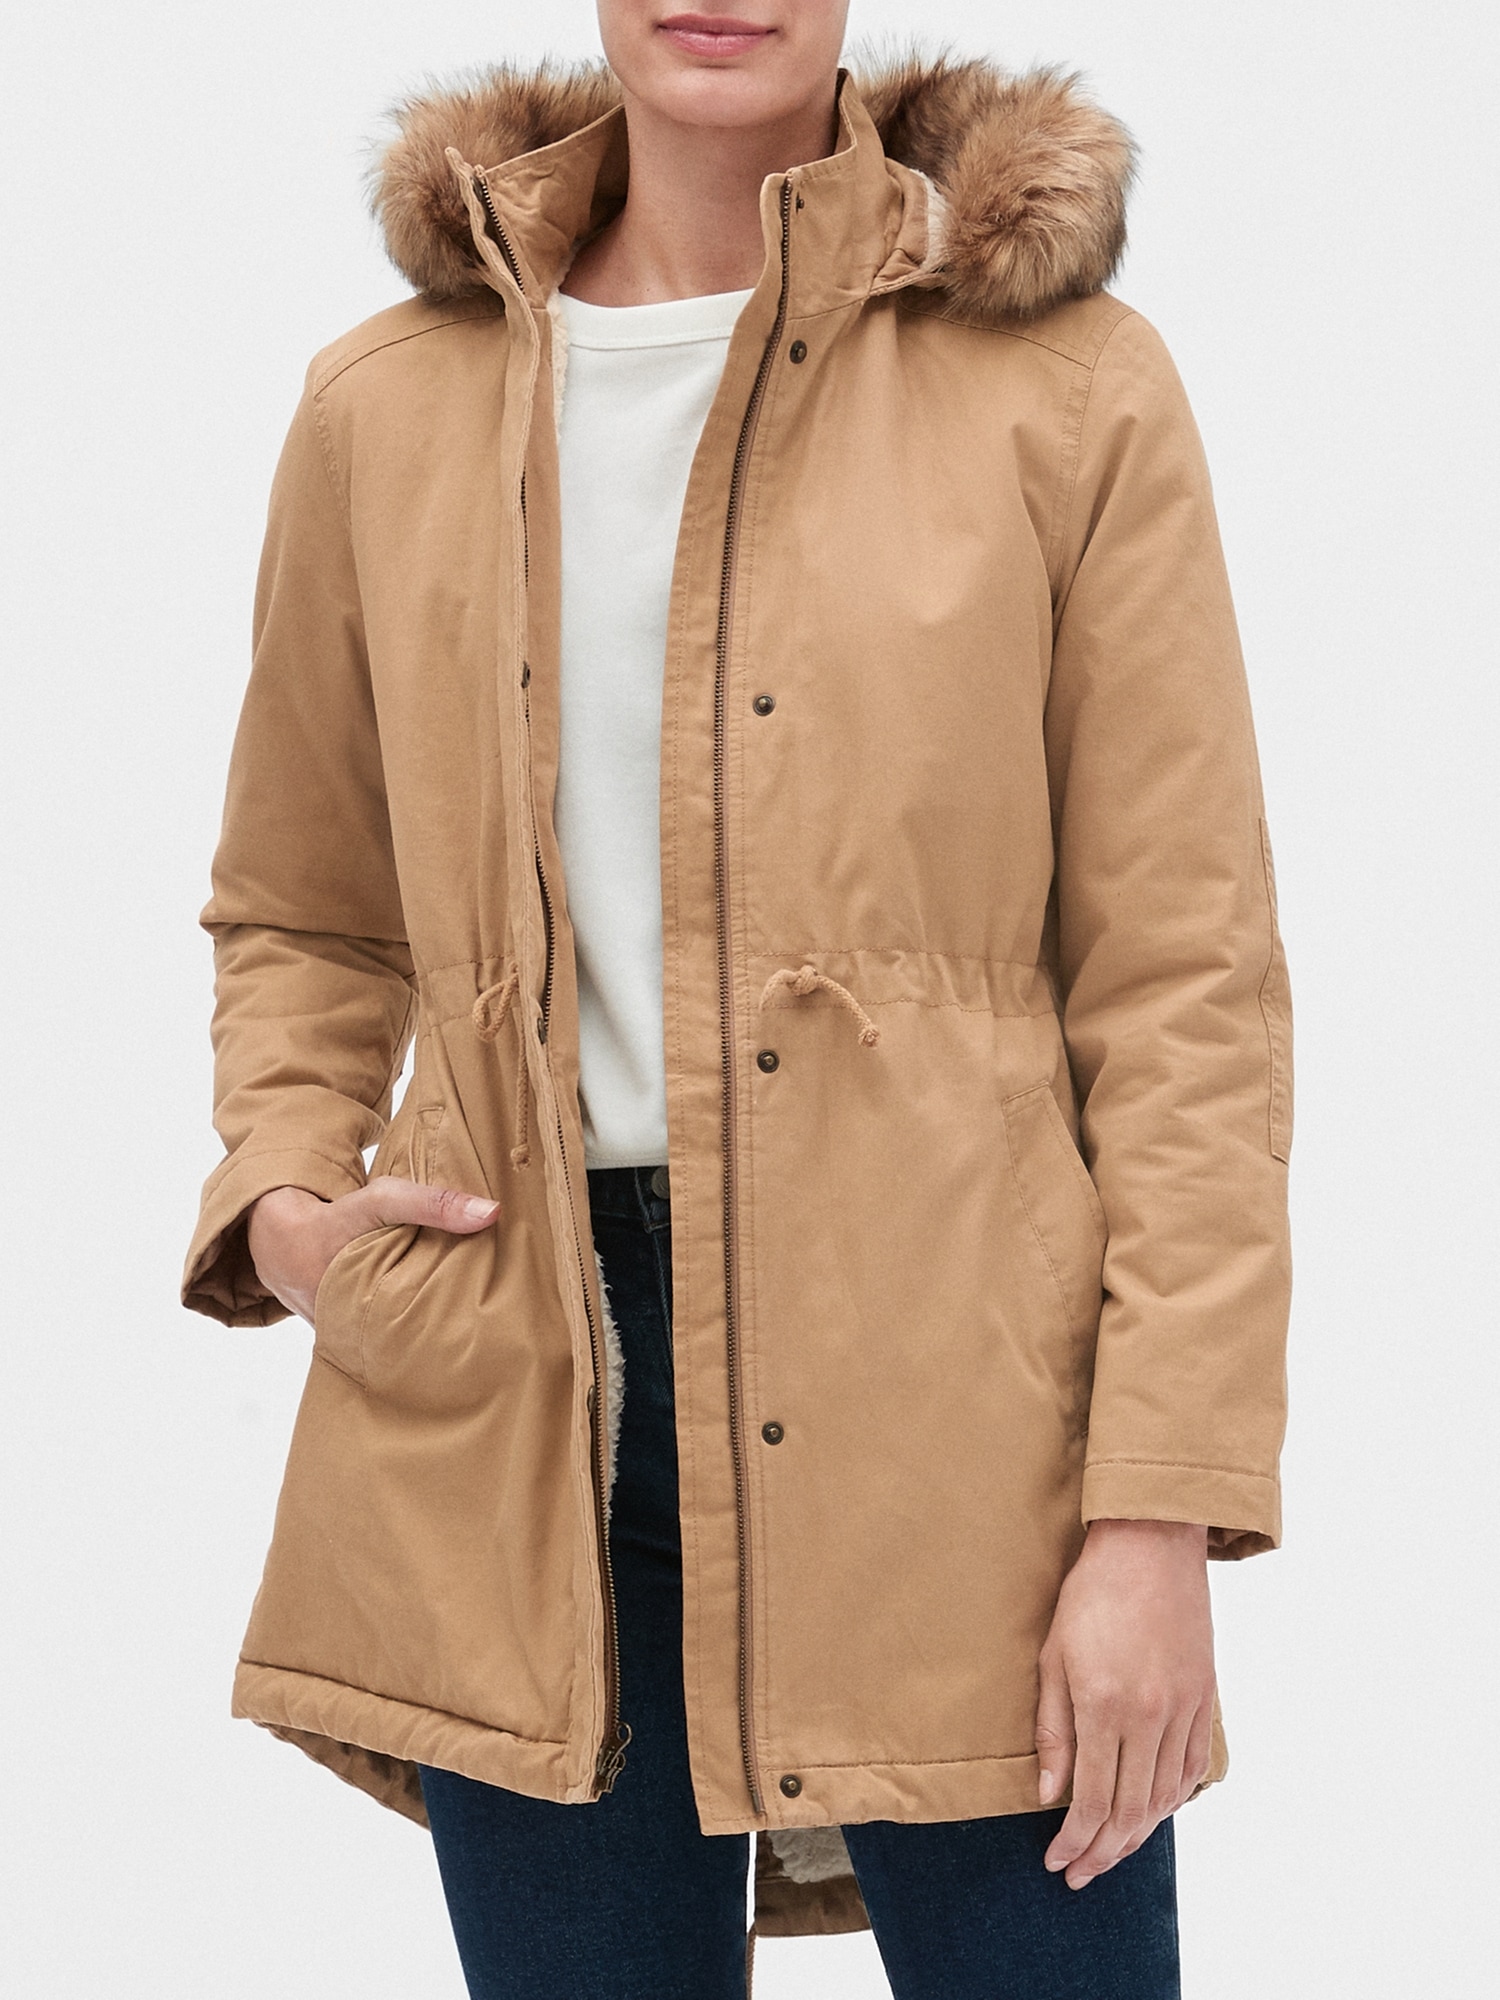 Hooded Parka With Sherpa Lining Recycled Polyester Padding,, 46% OFF